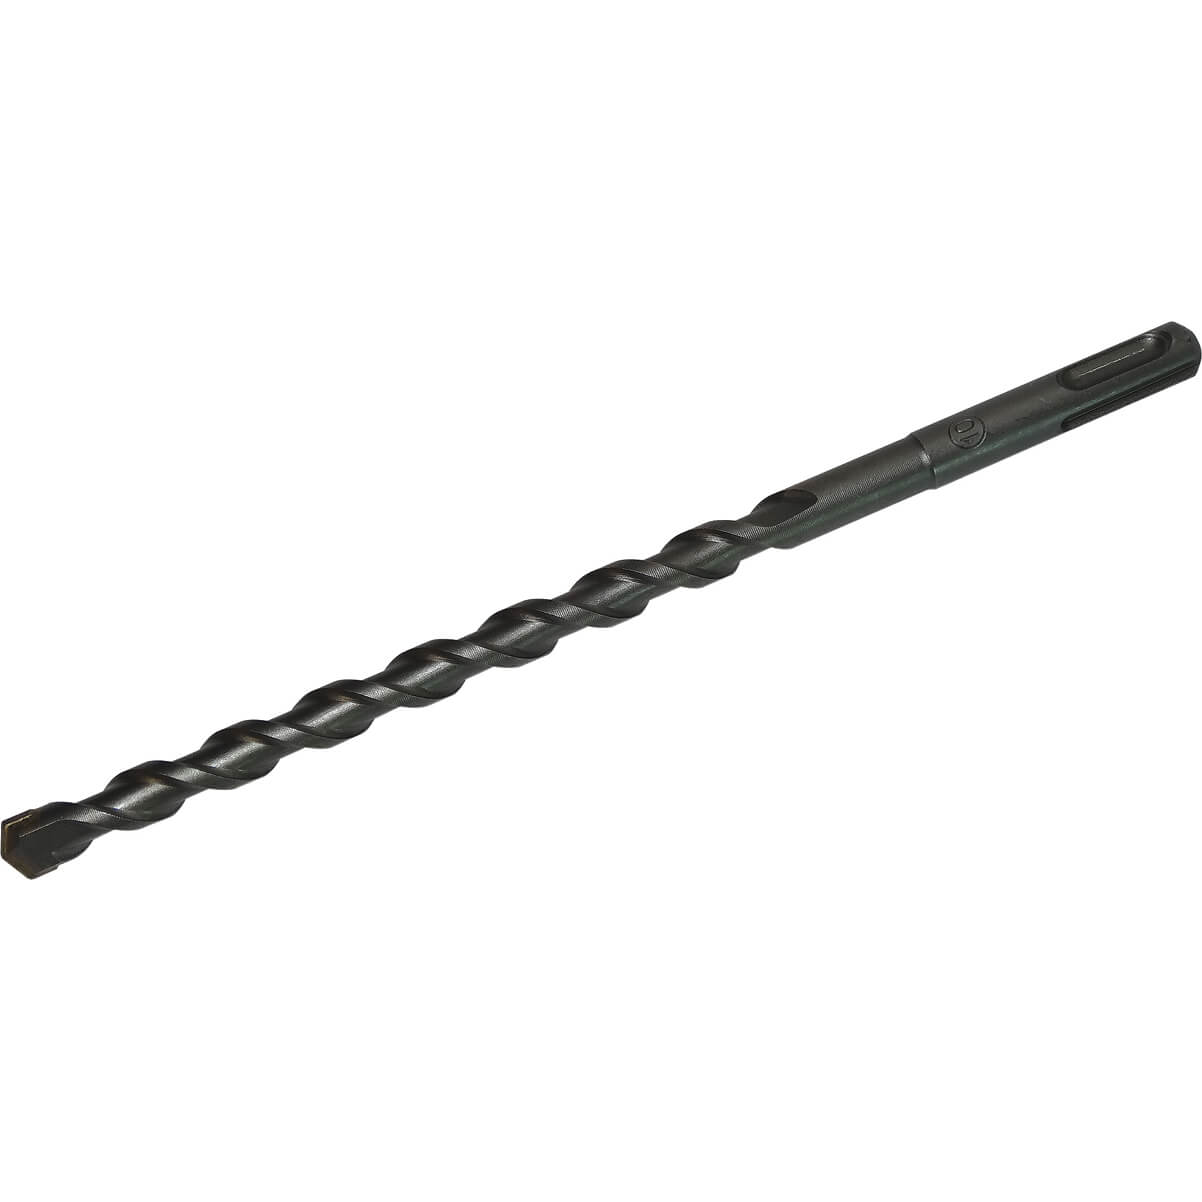 Image of CK SDS Plus Masonry Drill Bit 6.5mm 160mm Pack of 1